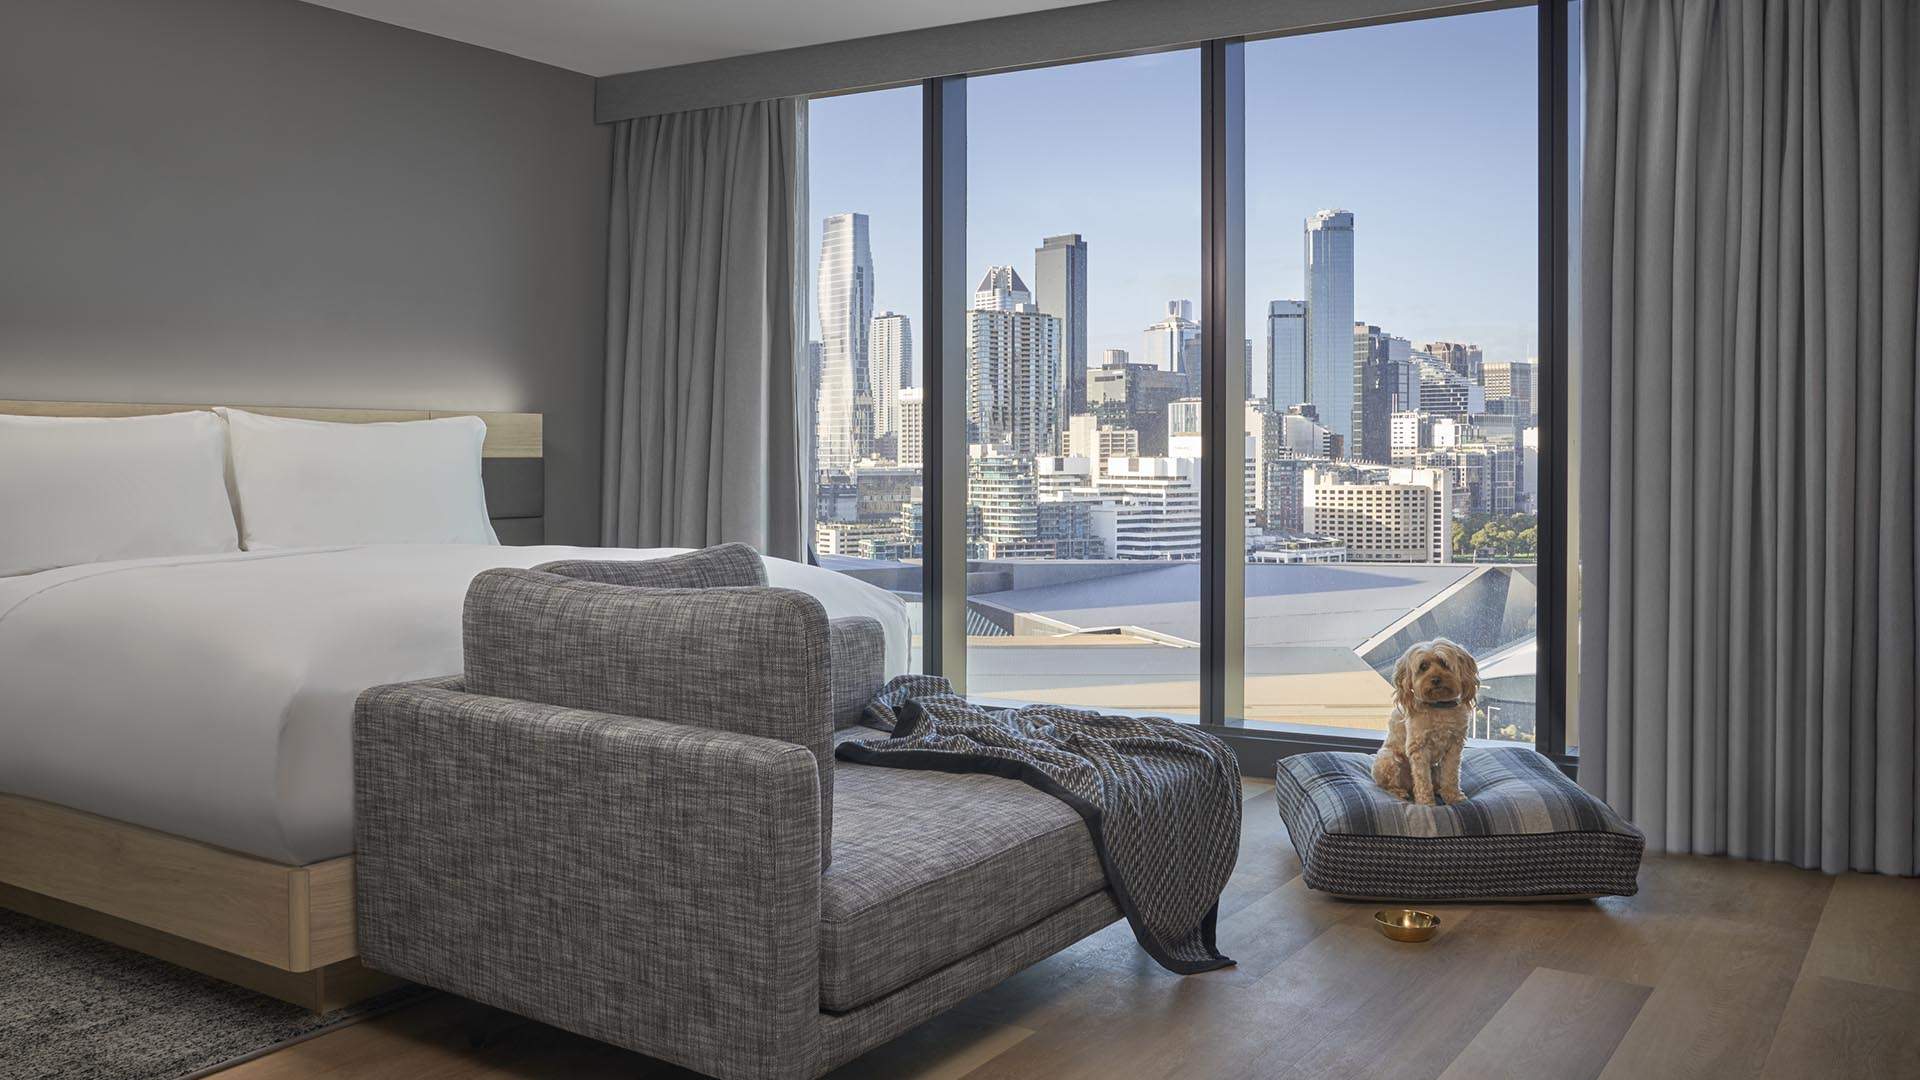 Design-Driven Marriott Chain AC Hotels Has Just Opened Its First Australian Site in Melbourne